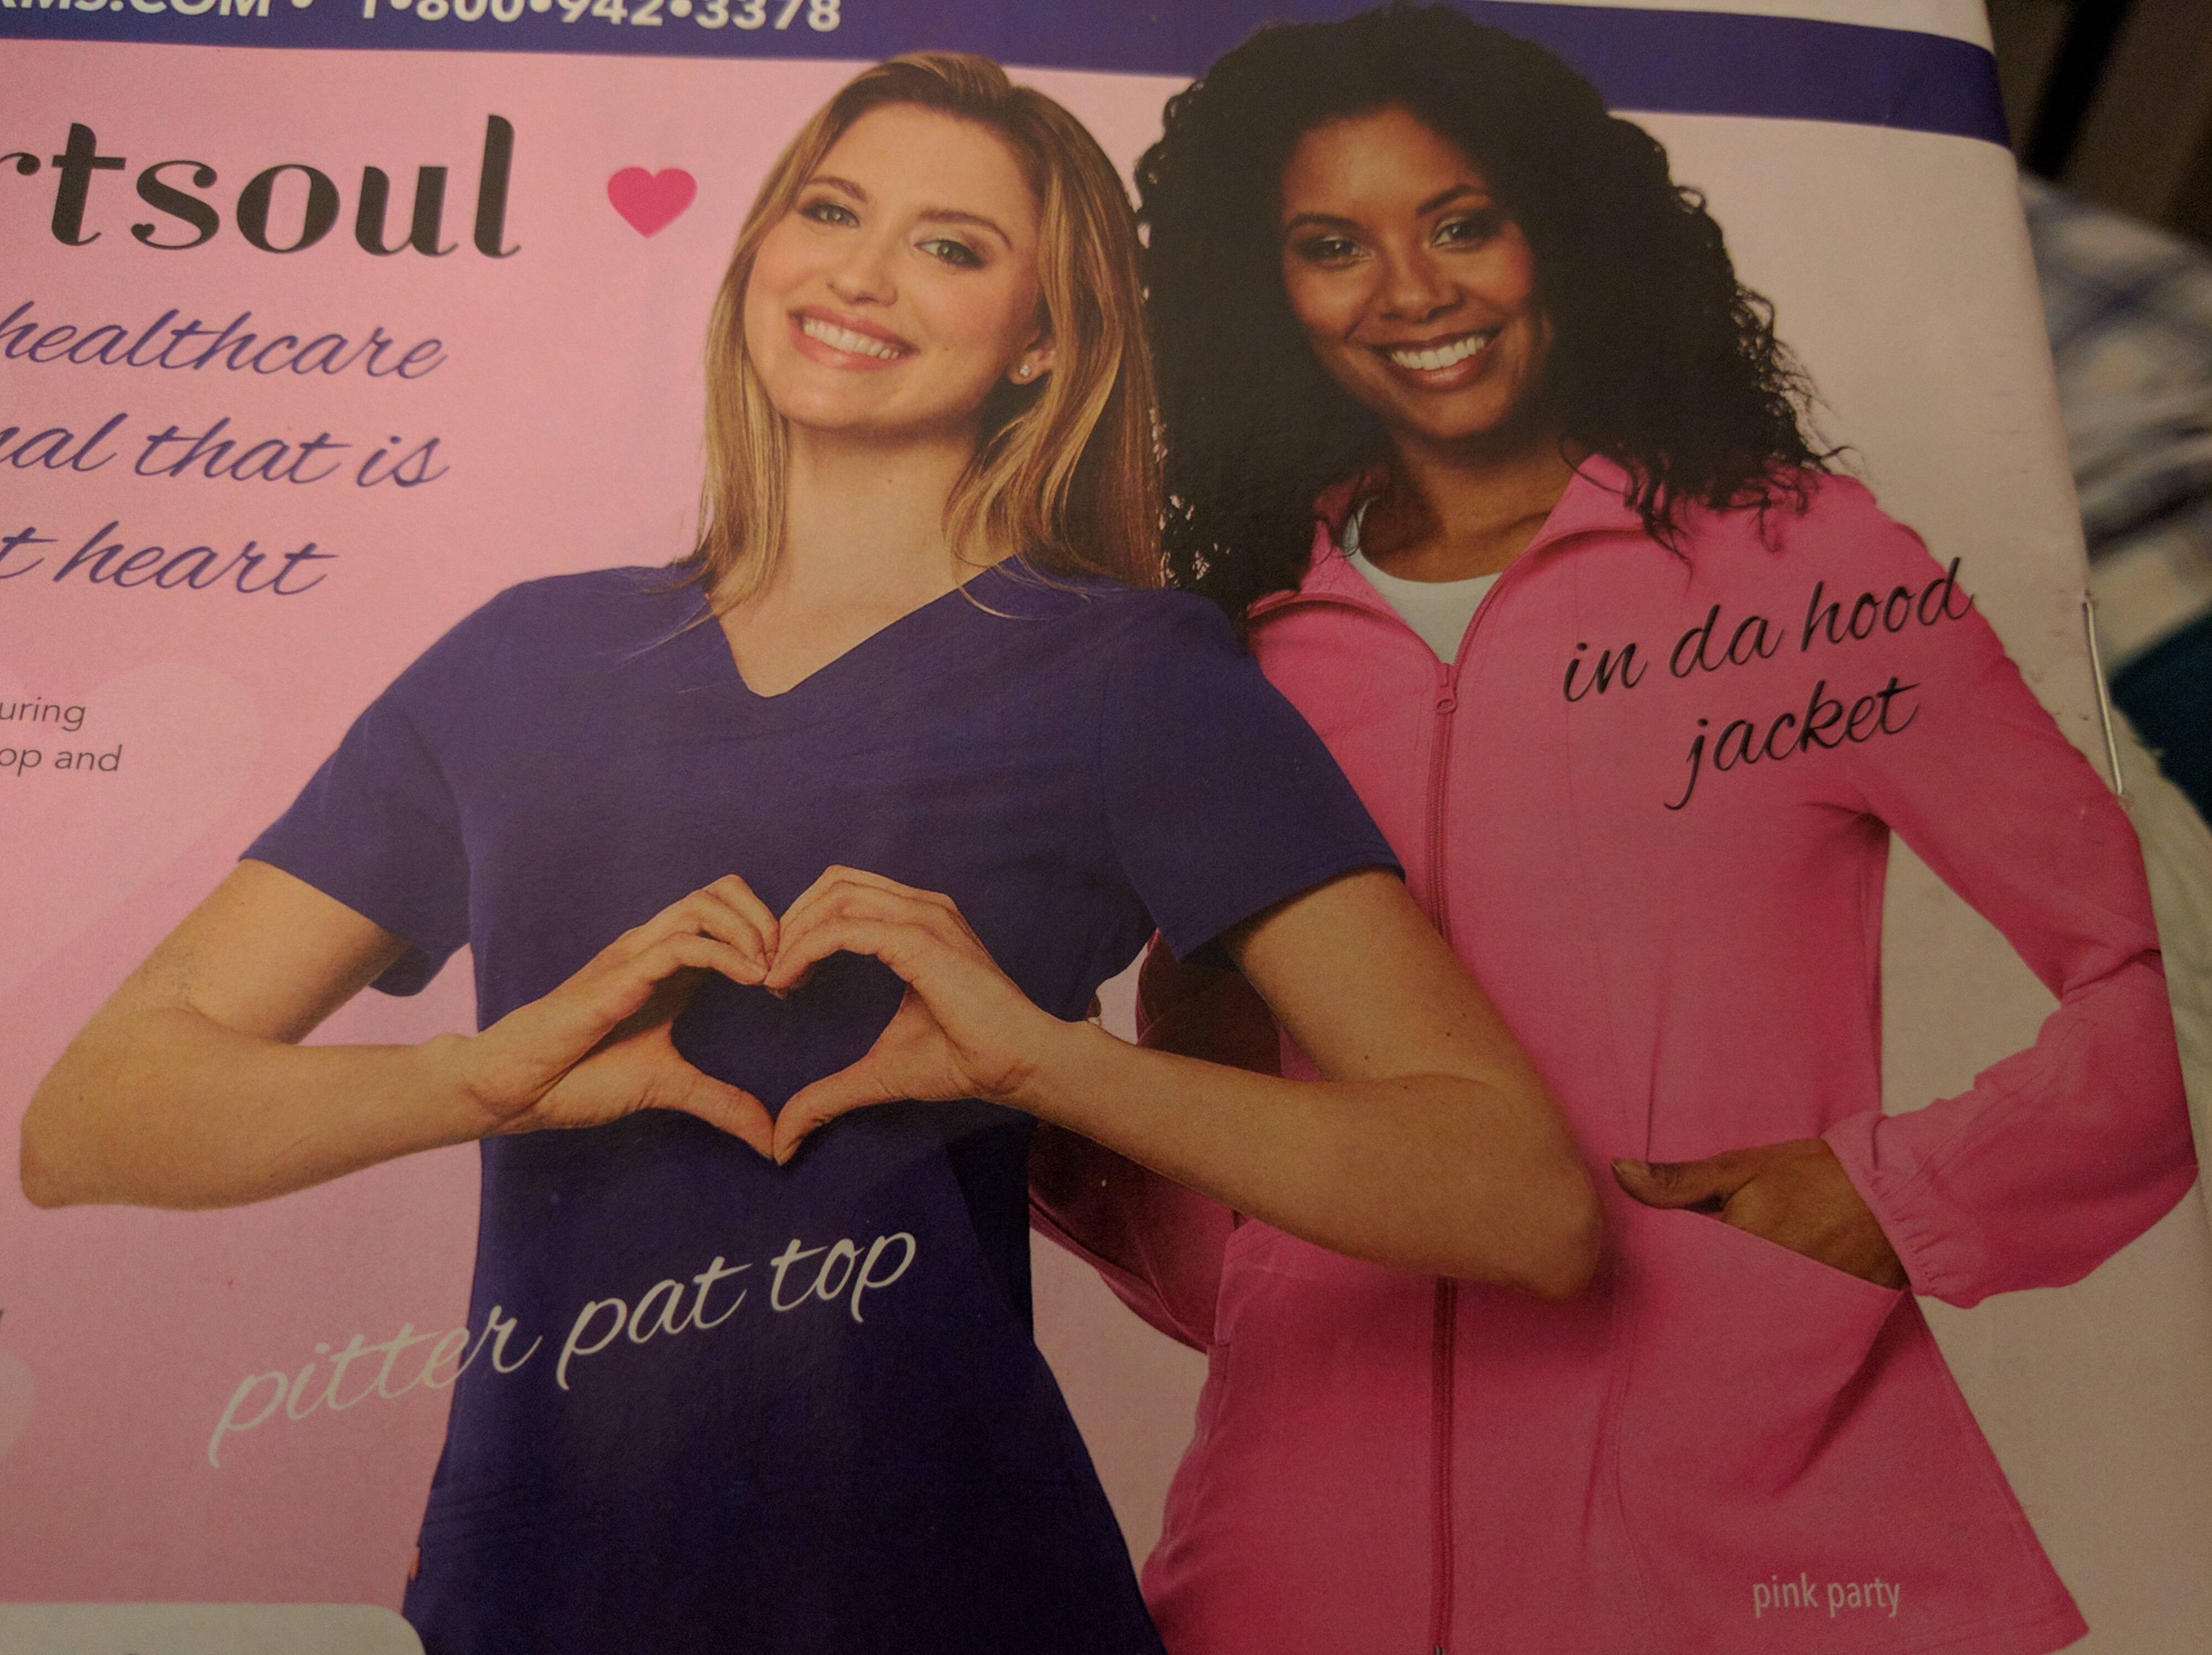 Women's clothes advertisement and the black woman is wearing a In Da Hood jacket